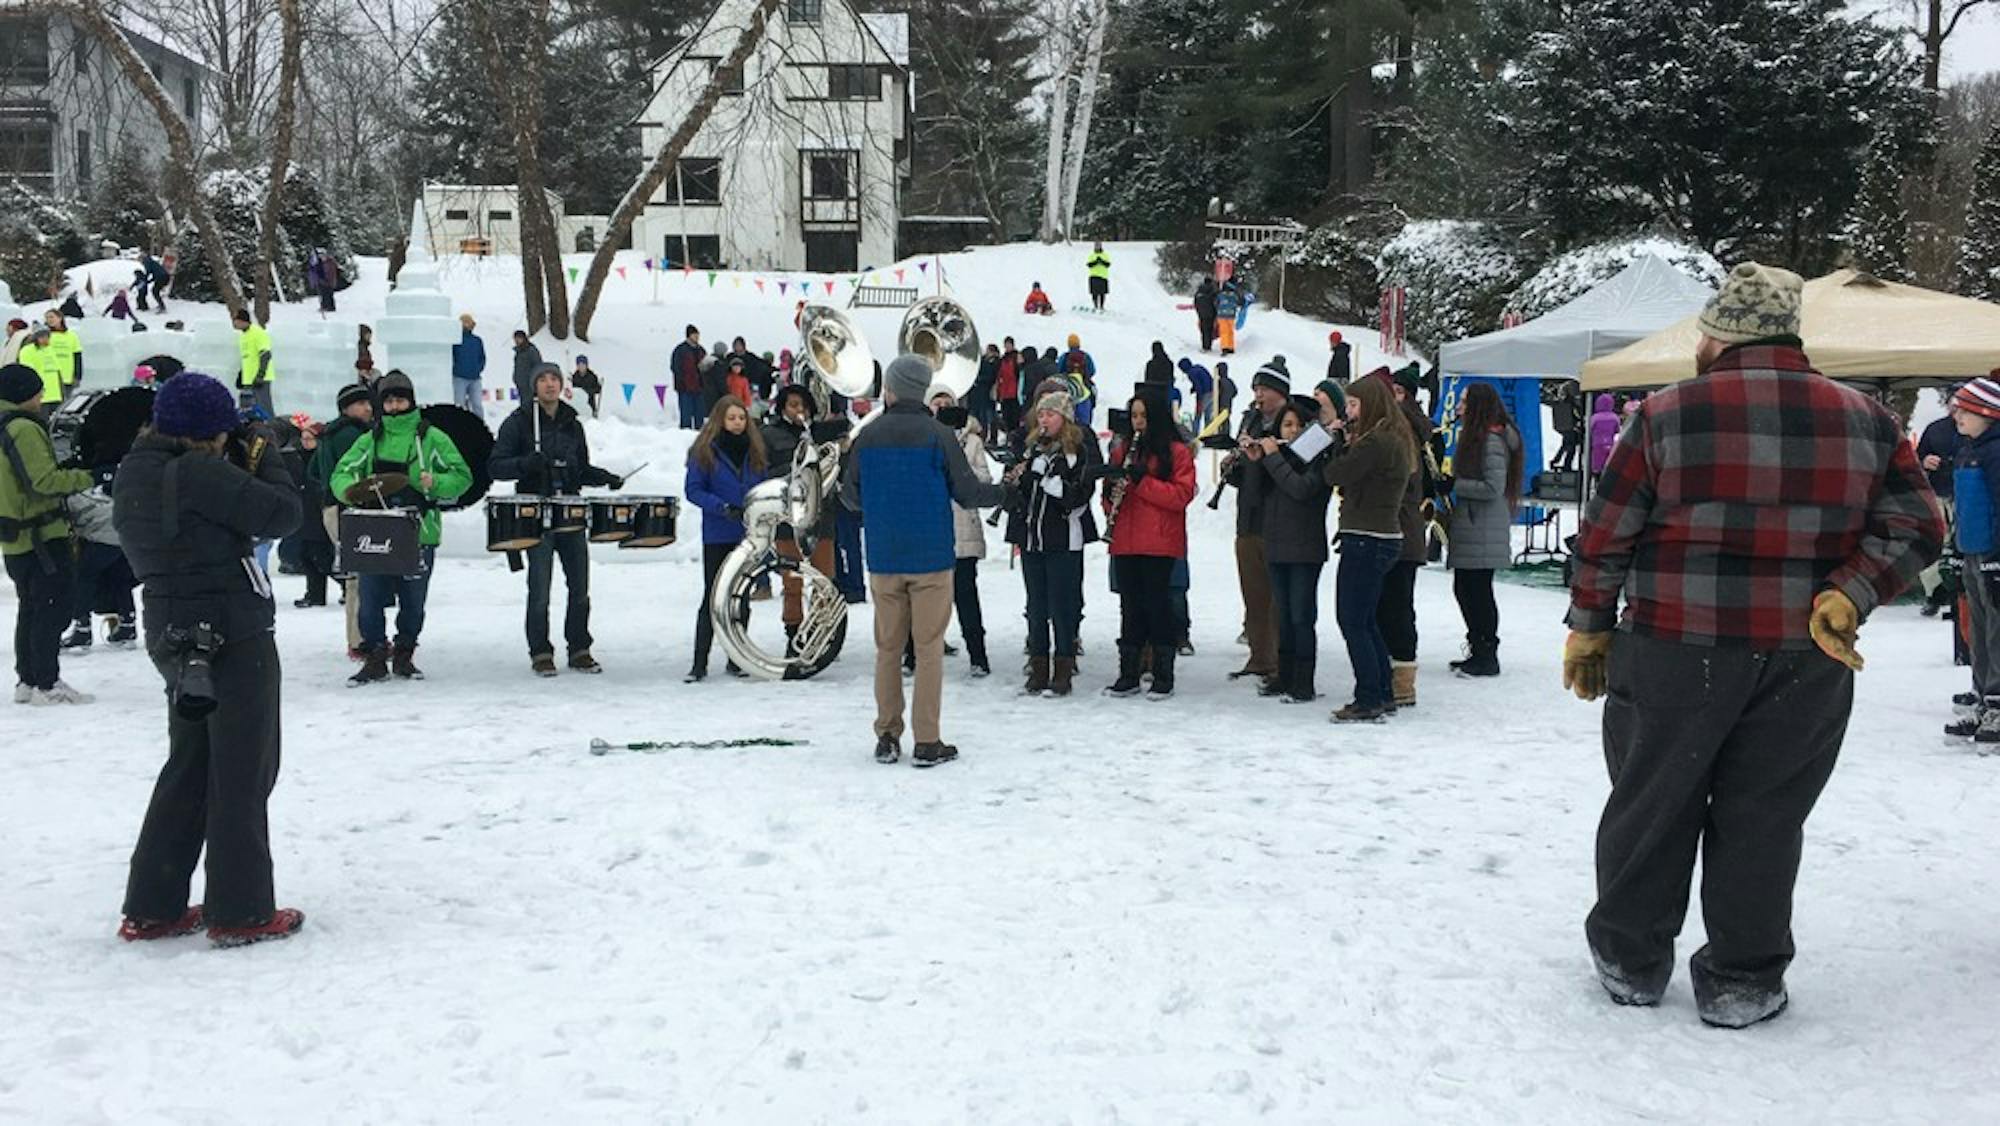 The Dartmouth College Marching Band performed on the Green for this year's Winter Carnival.